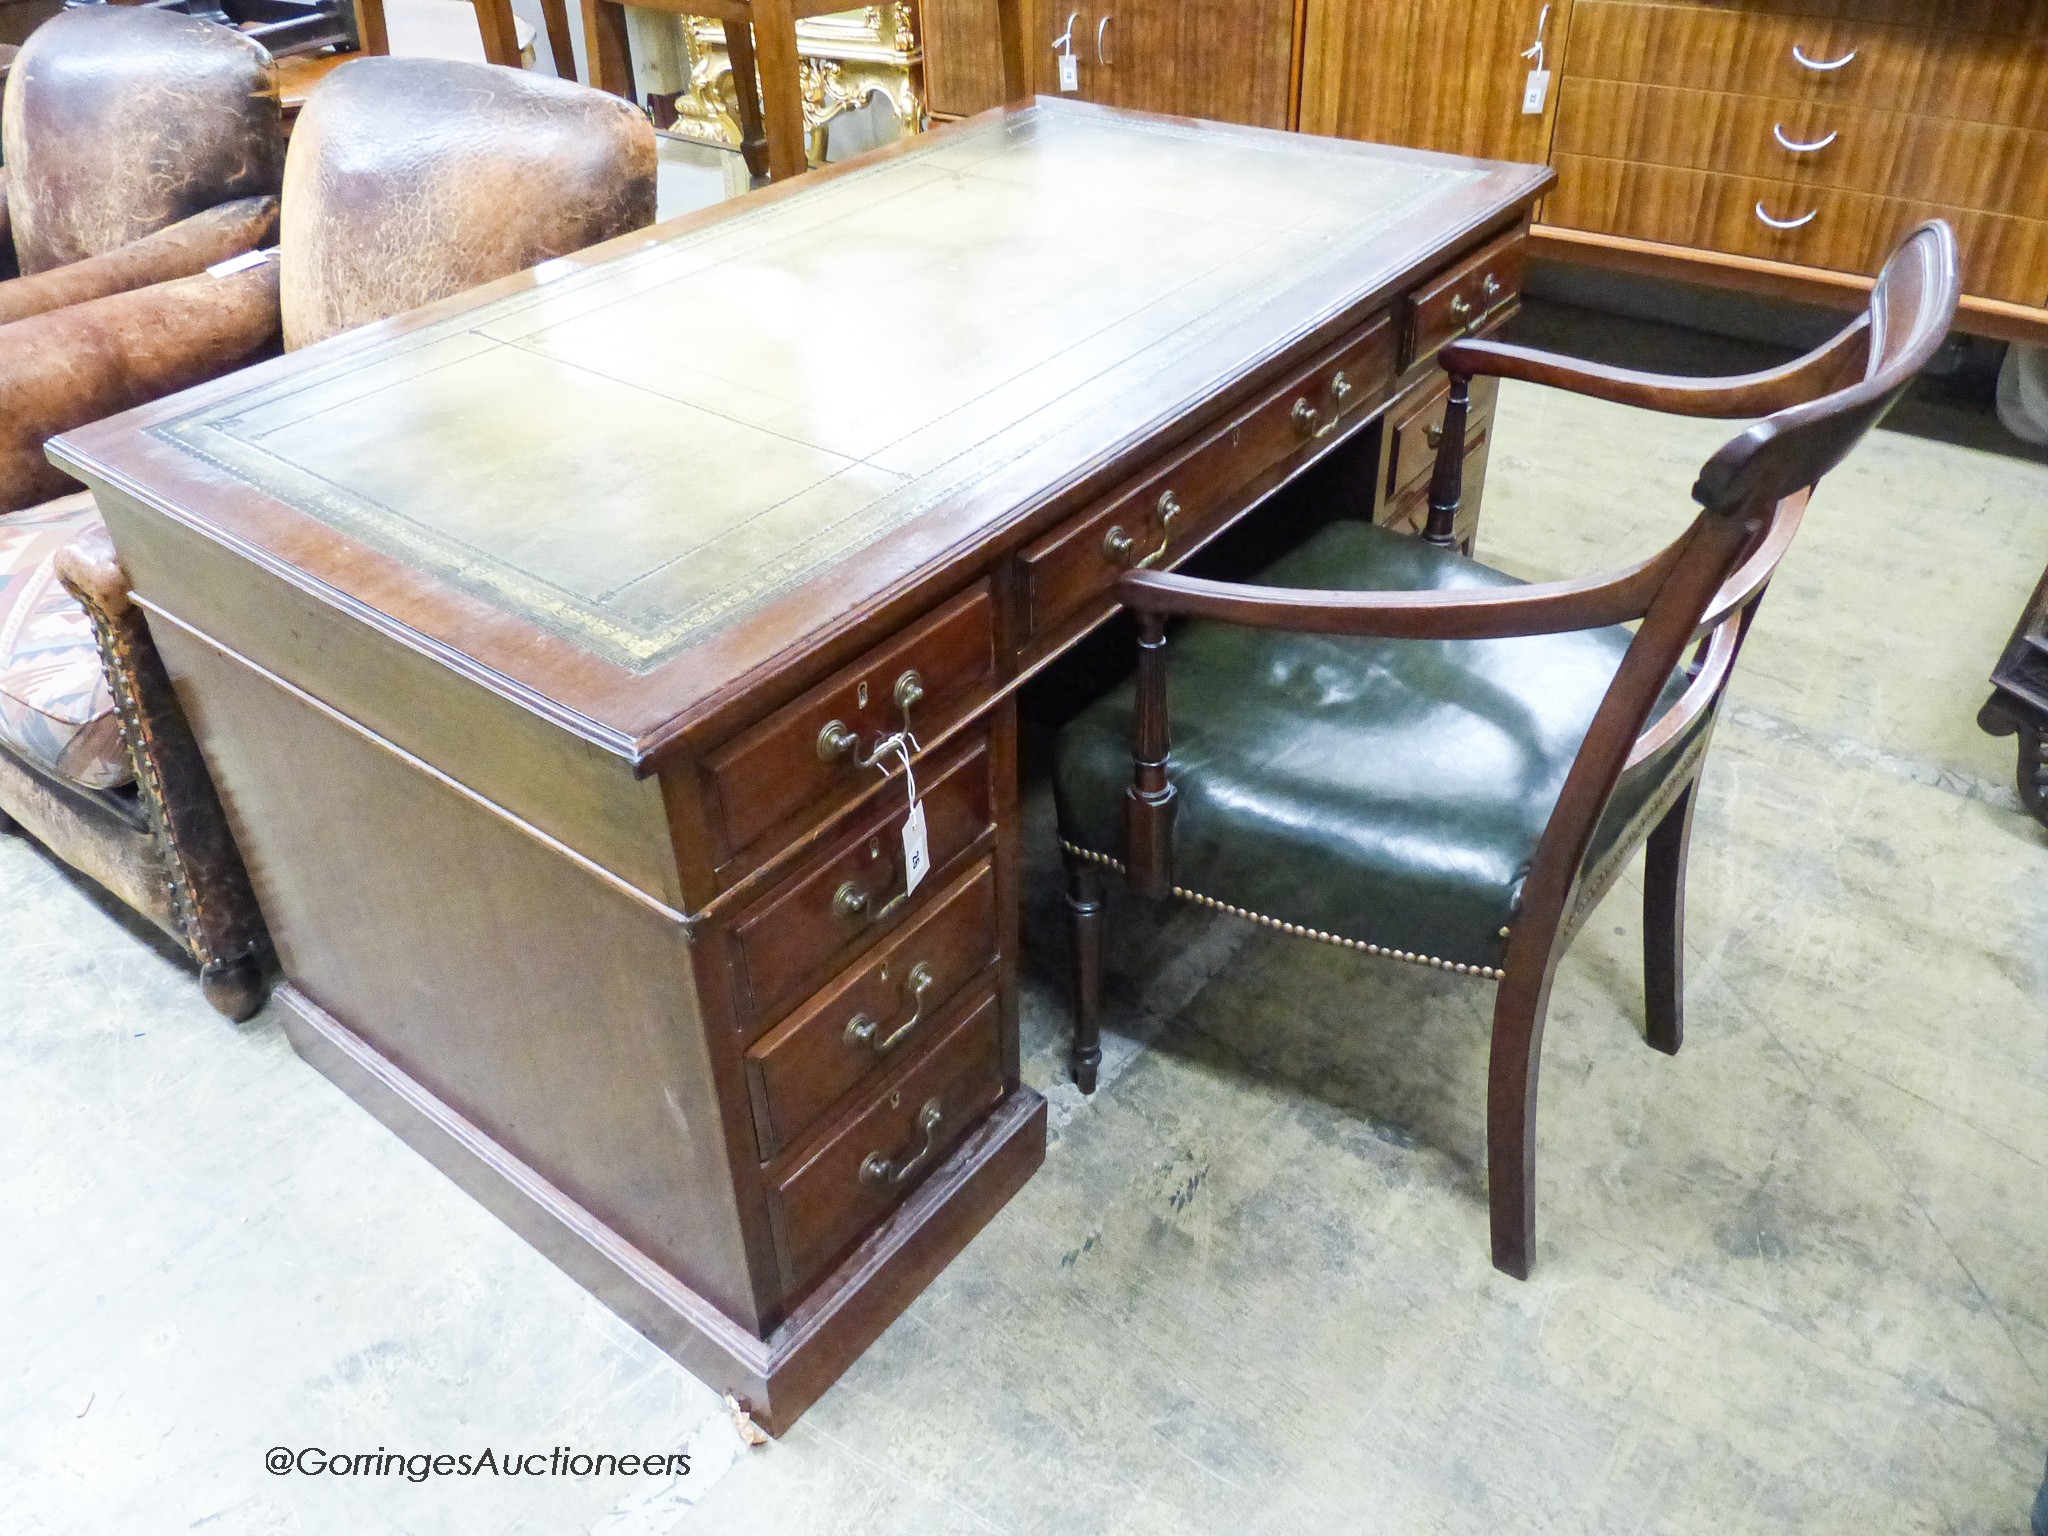 An Edwardian mahogany pedestal desk, length 138cm, depth 75cm, height 74cm together with a George III mahogany elbow chair